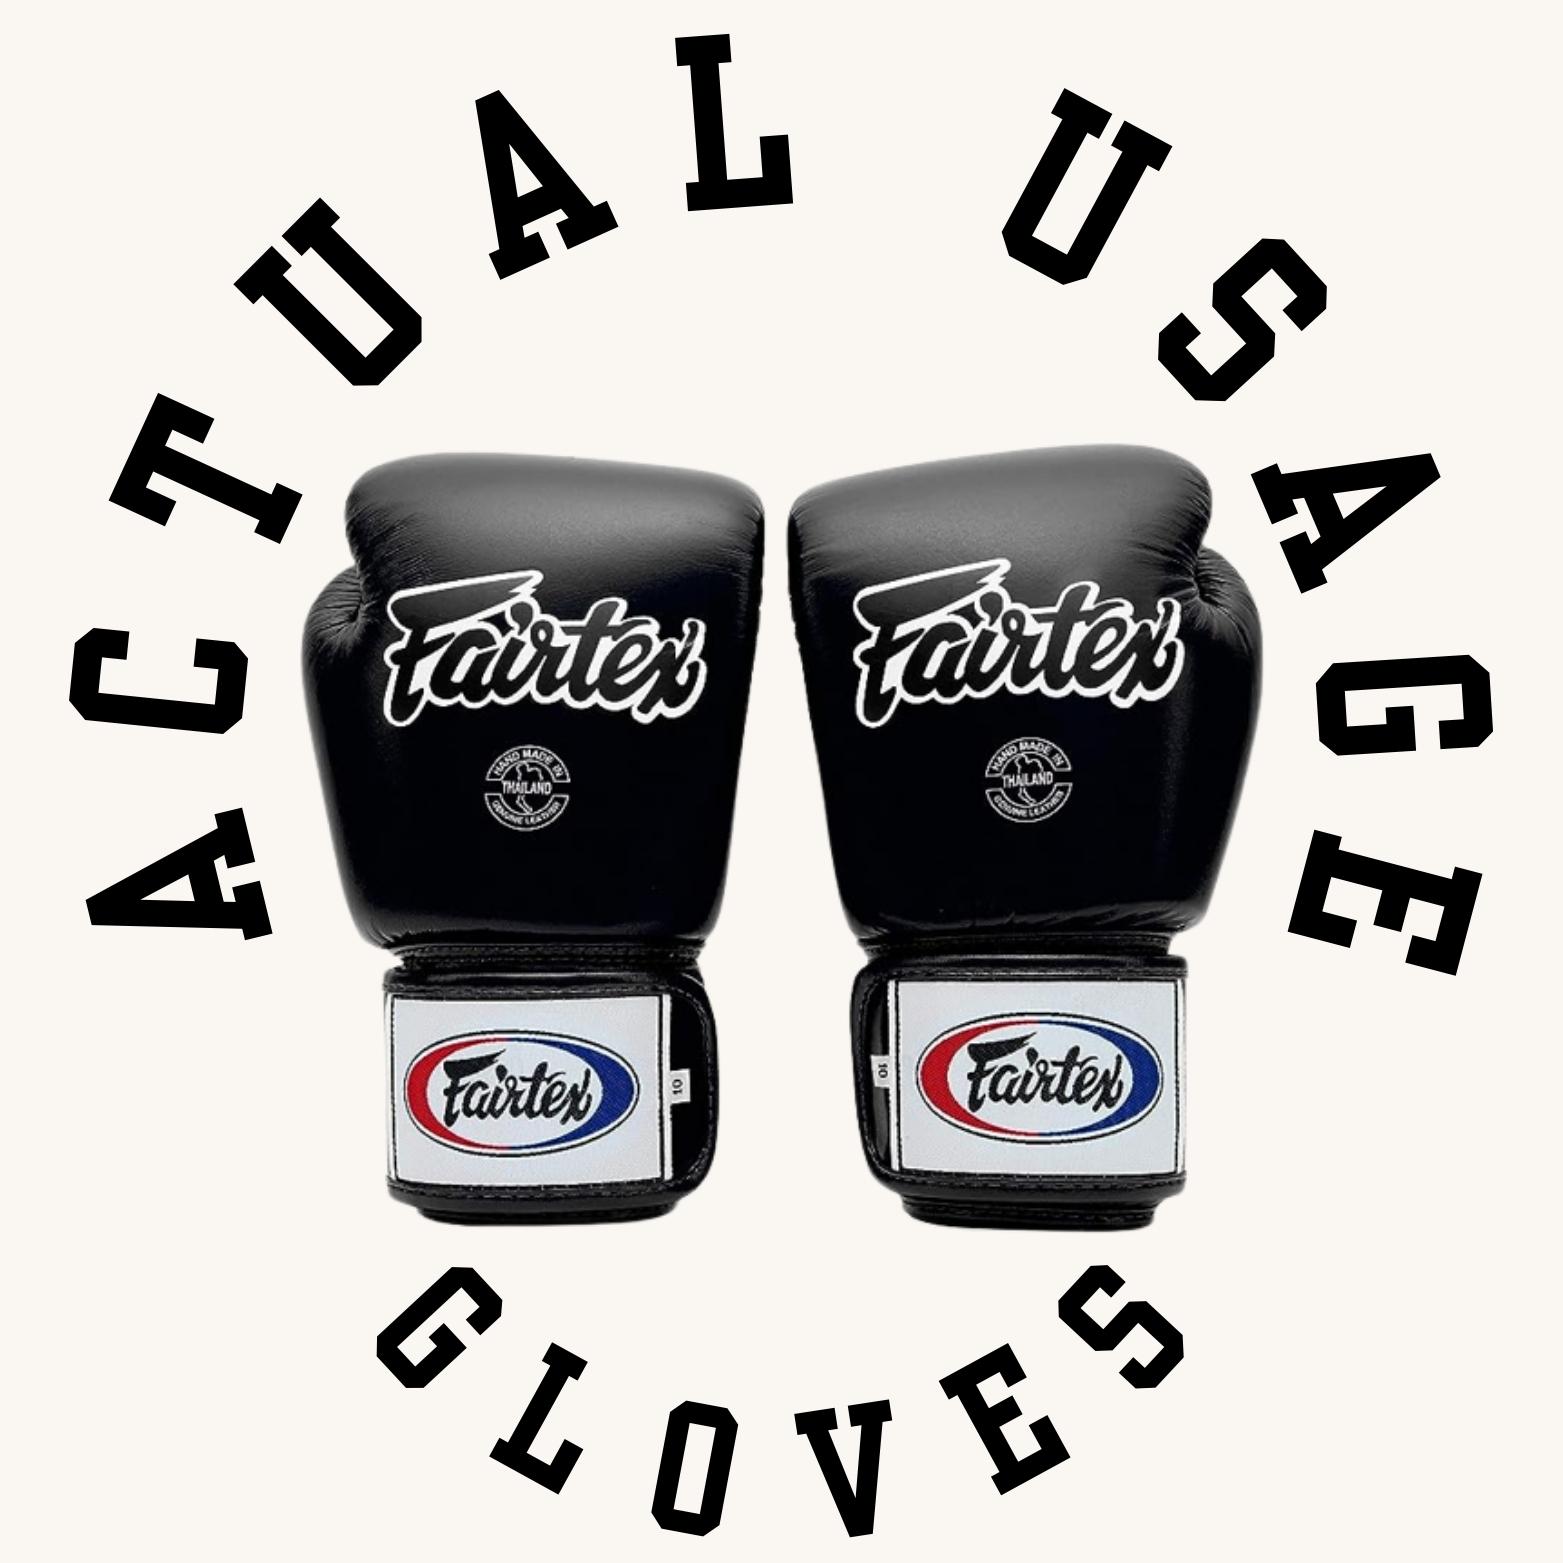 youth boxing gloves